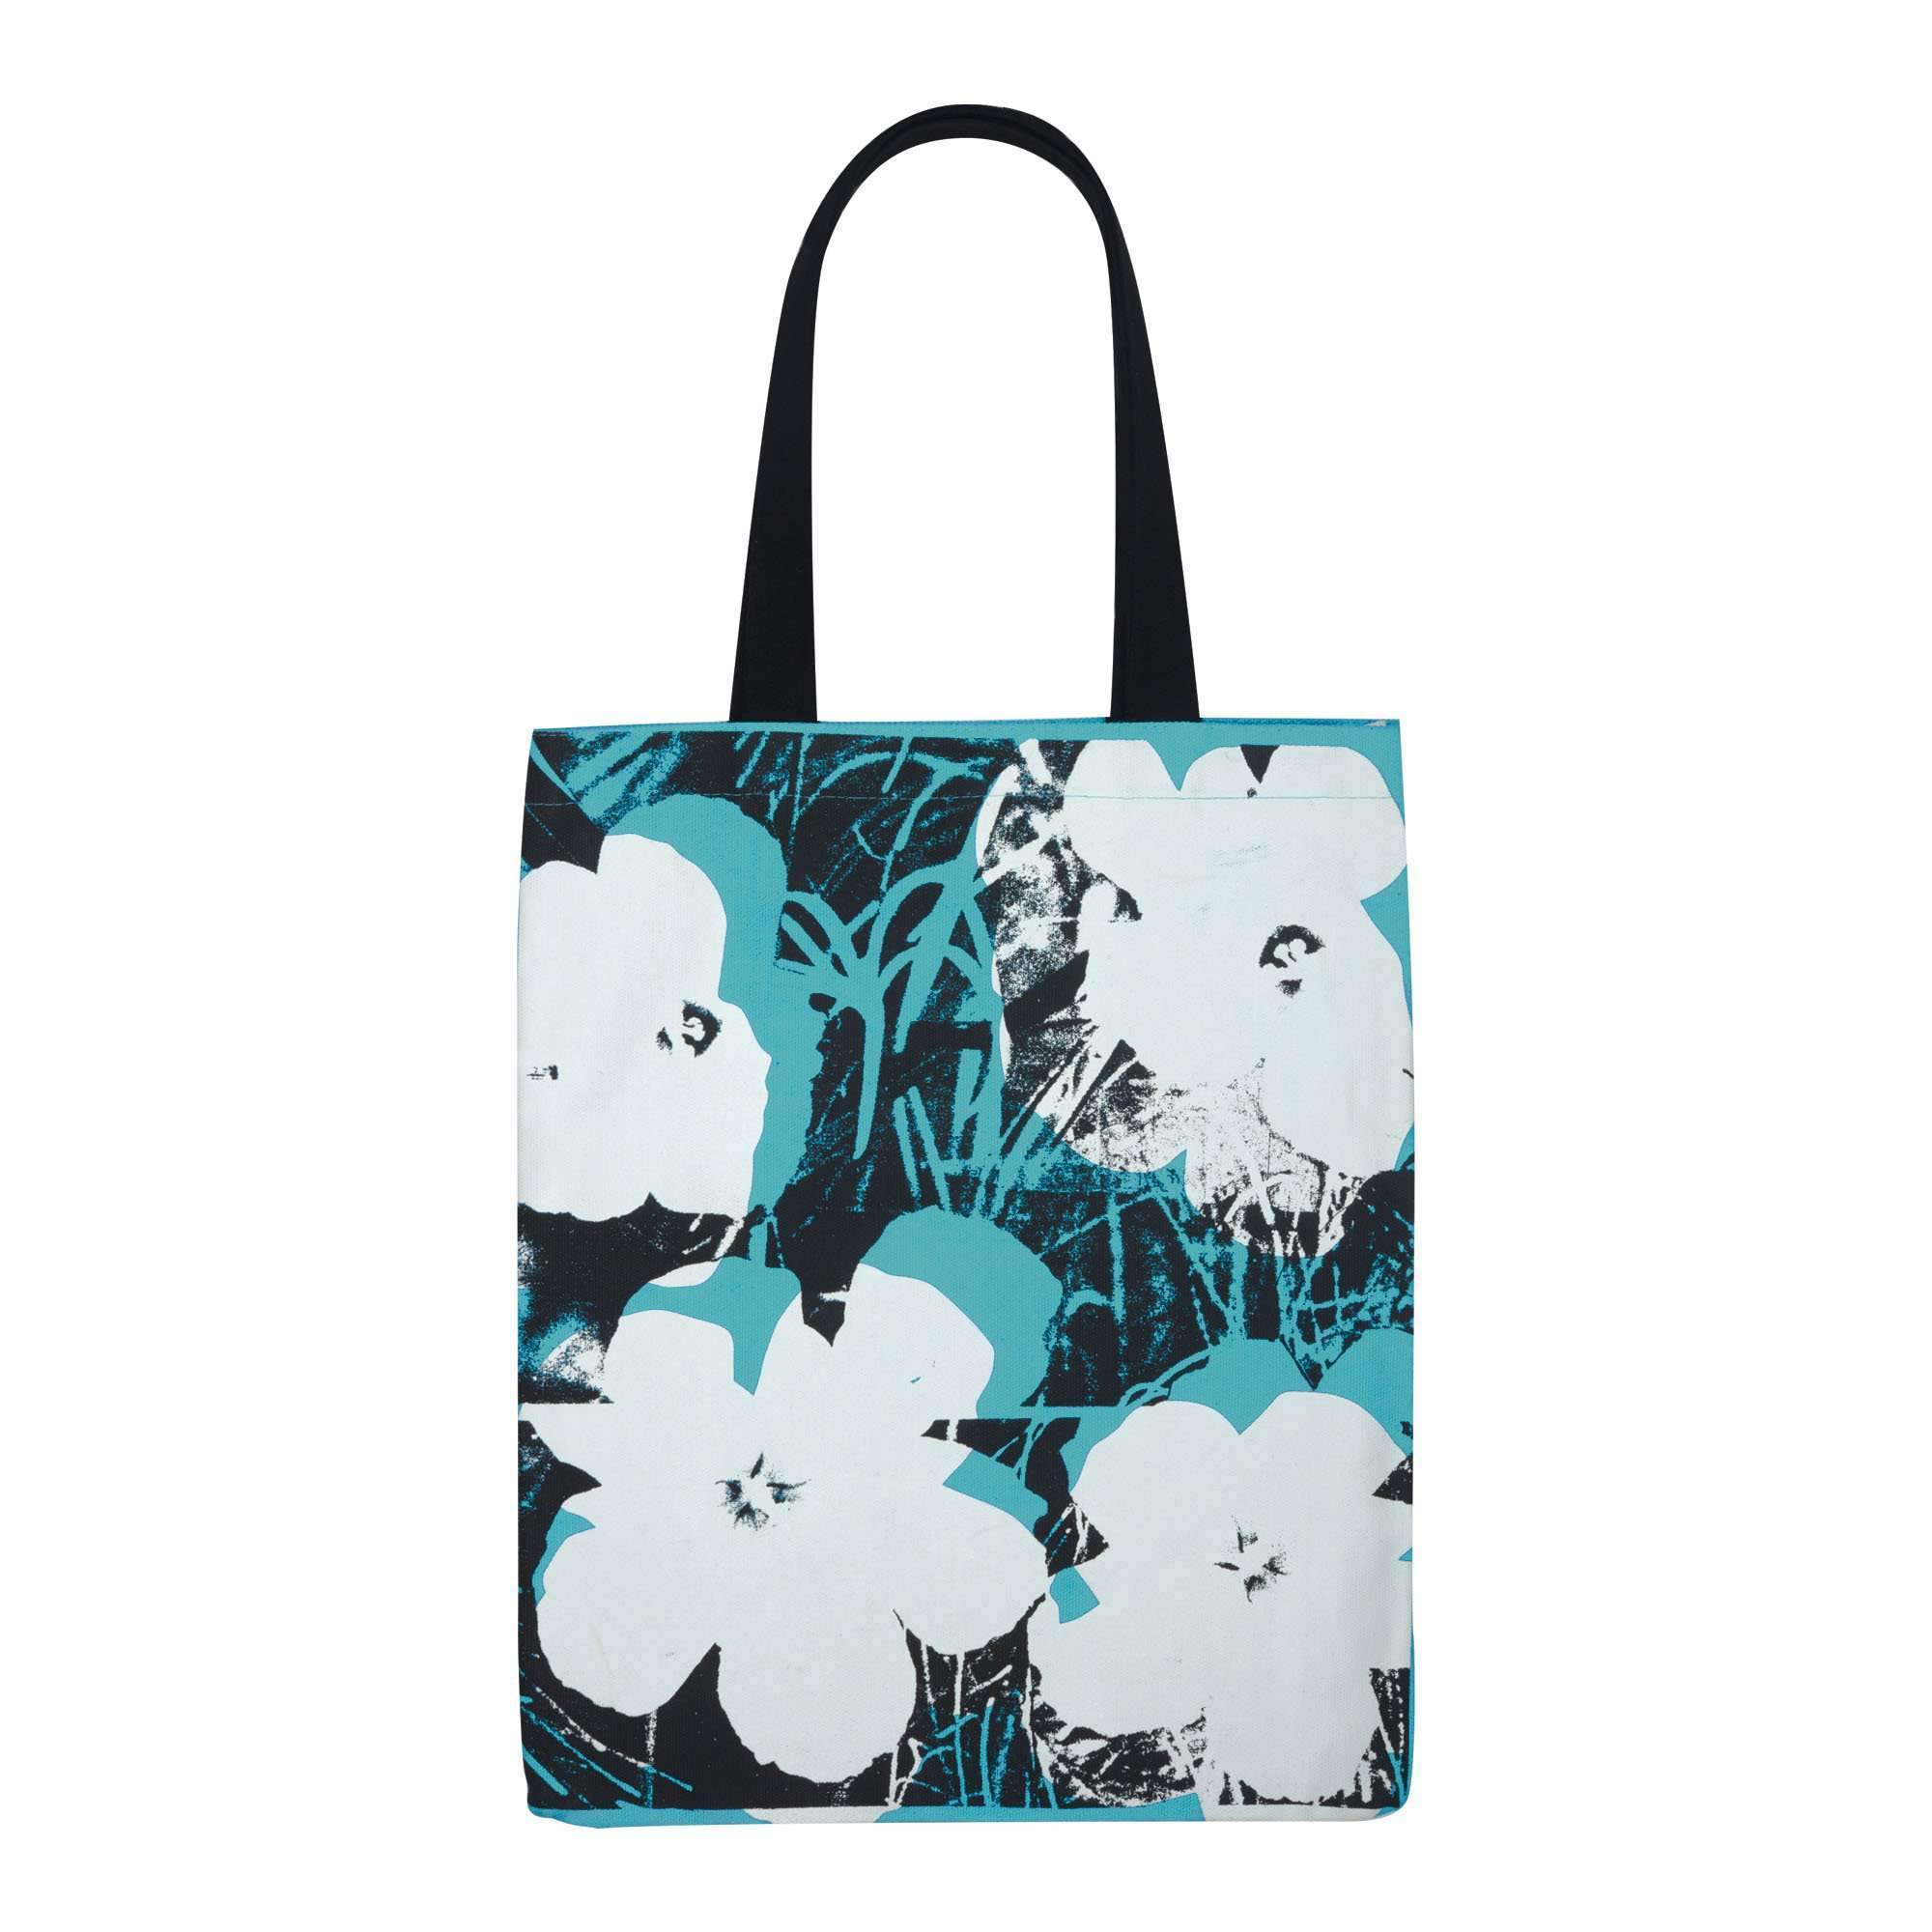 Andy Warhol Poppies Canvas Tote Bag